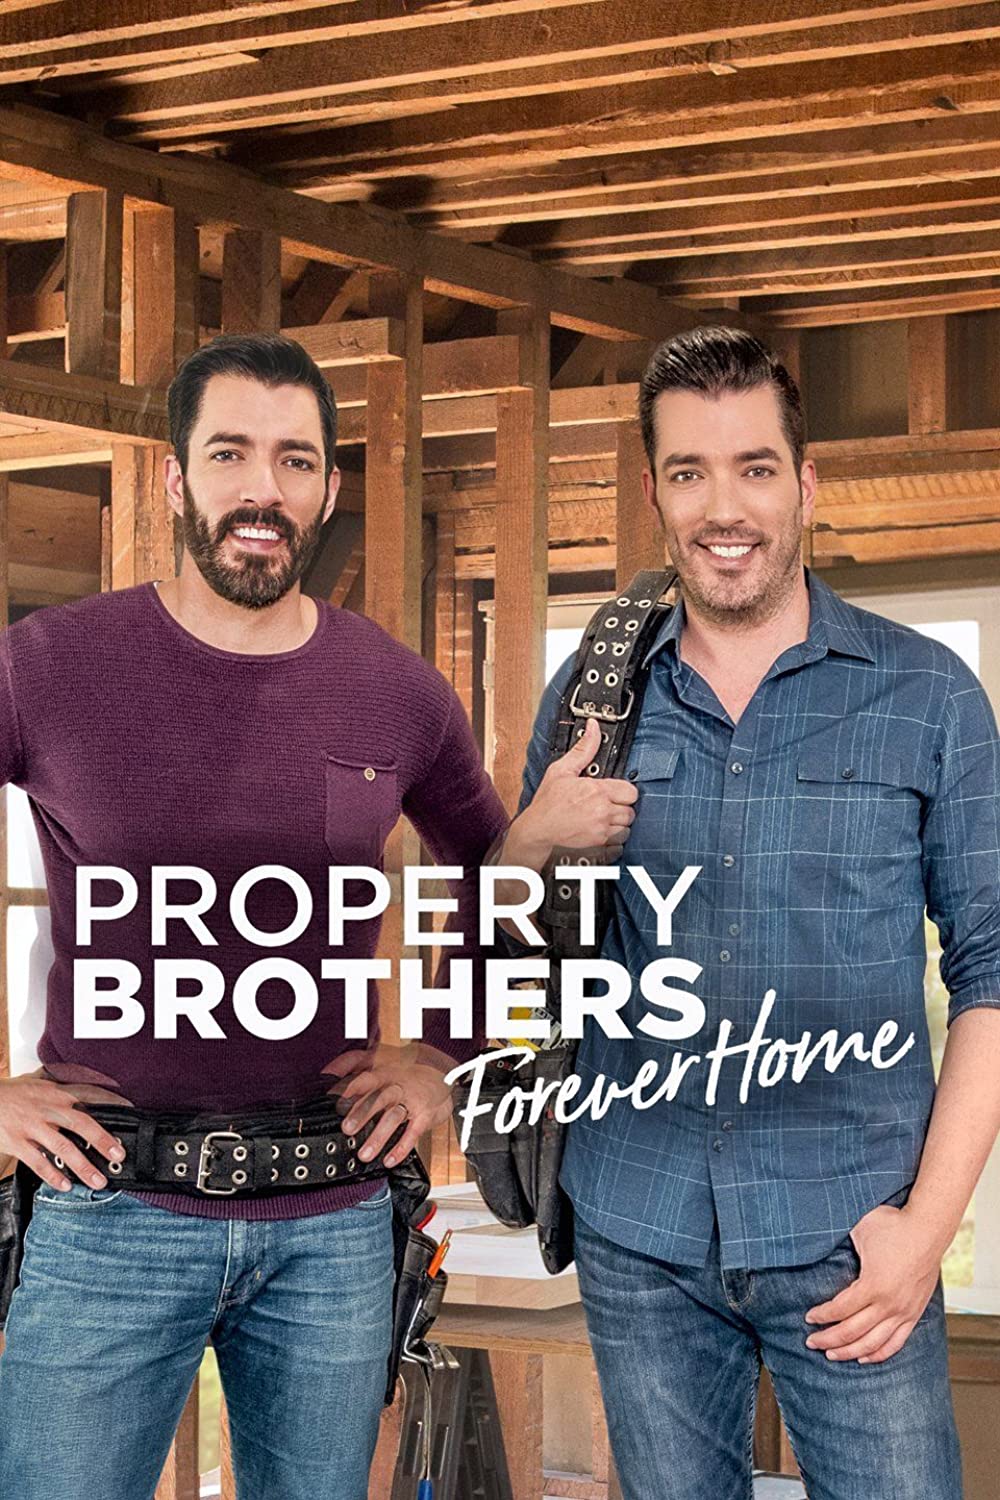  Property Brothers: Forever Home - Season 6